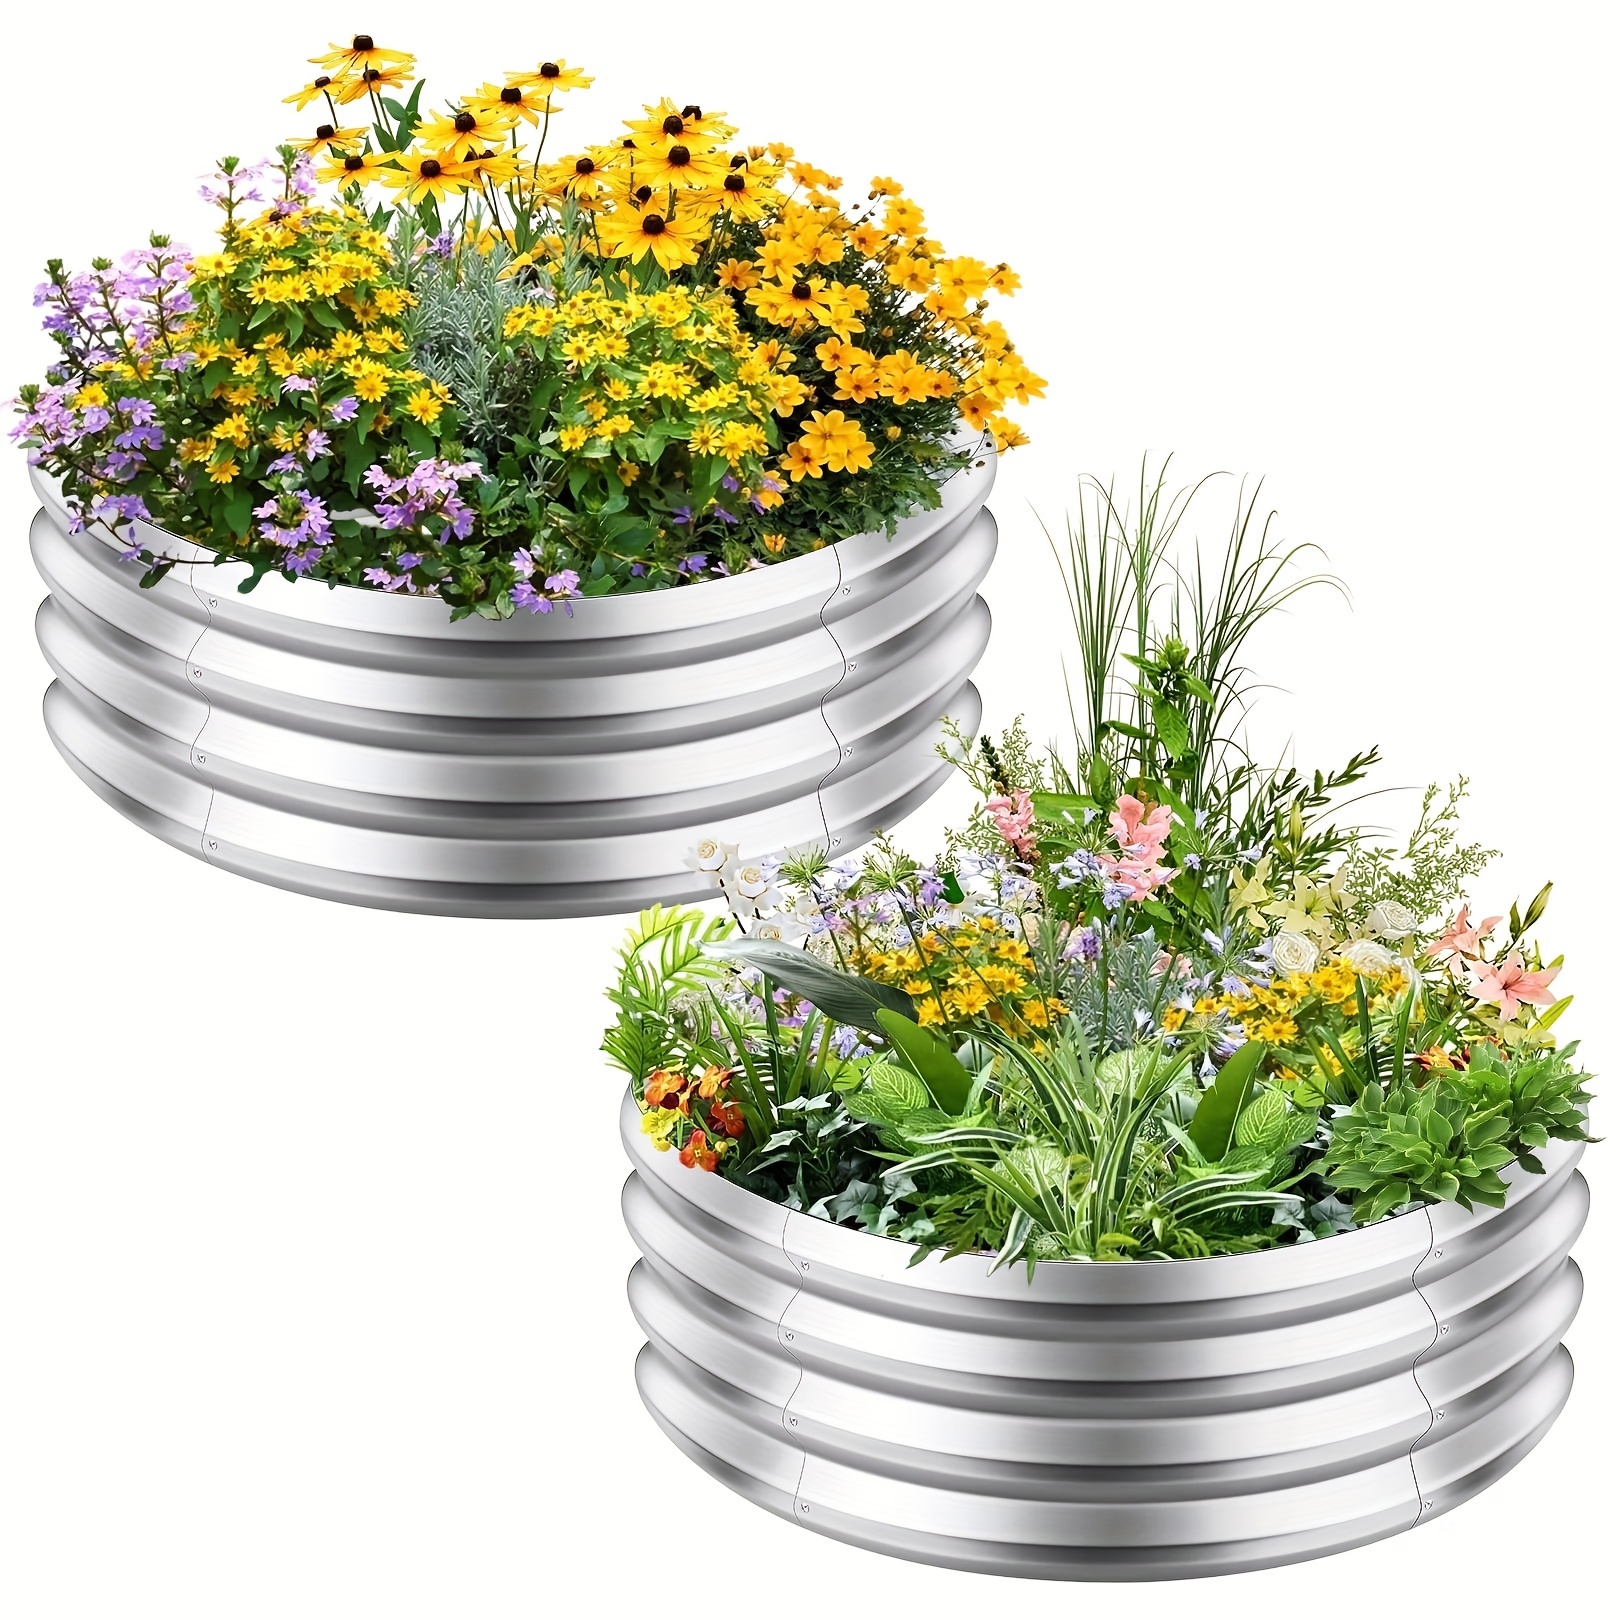 

Galvanized Raised Garden Bed Kit, Metal Round Planter Box For Outdoor, Garden Bed For Planting Vegetables Plants, 3 Ft X 3 Ft * 2 Pack